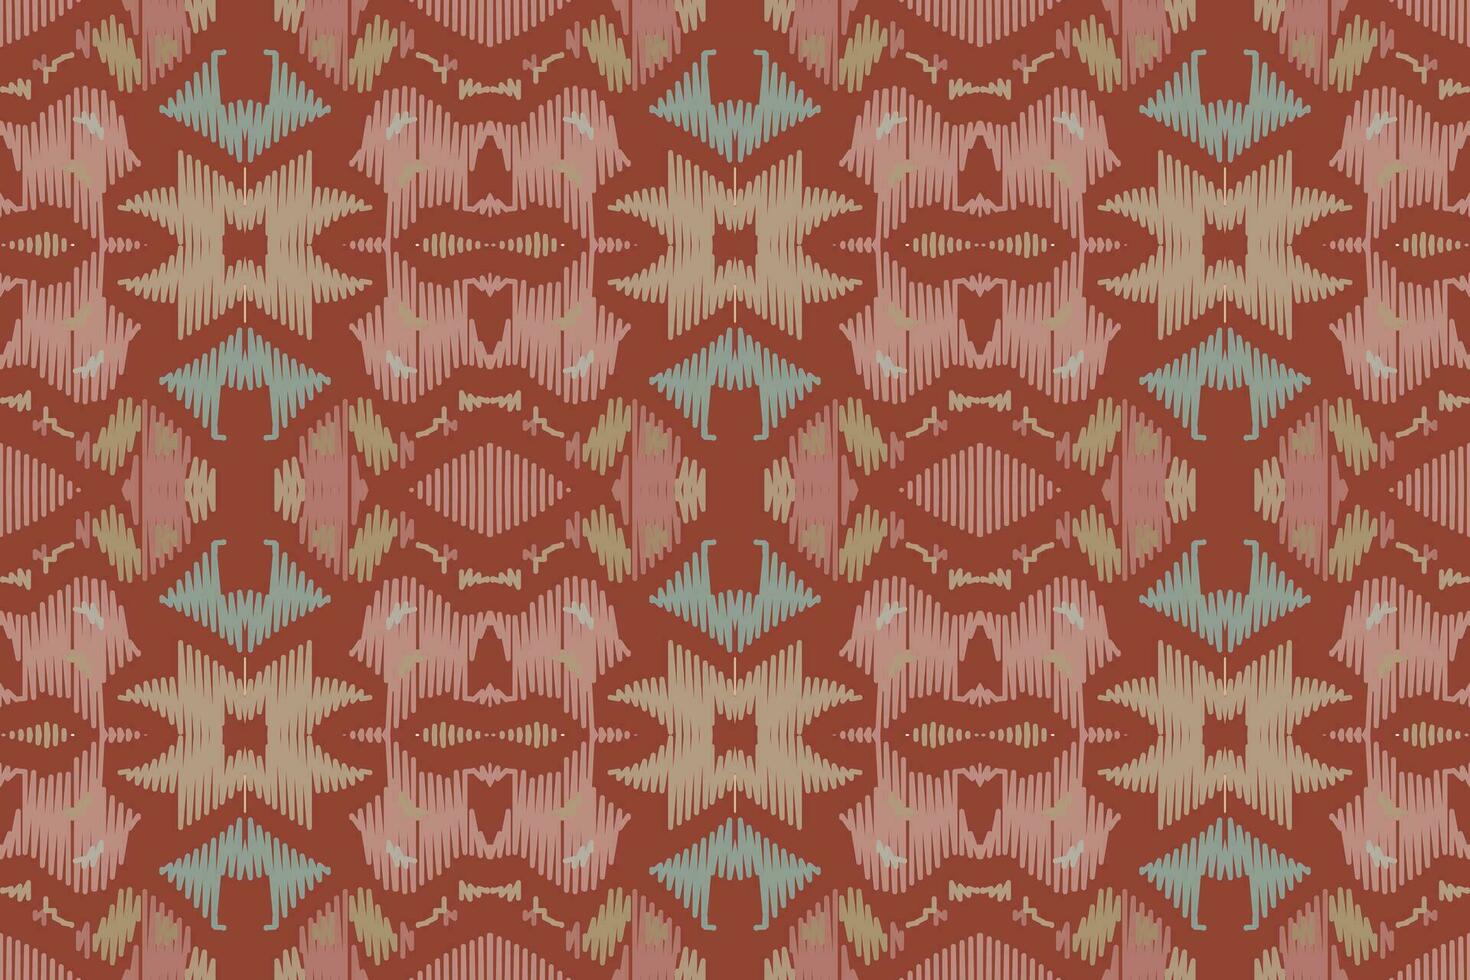 Ikat Paisley Pattern Embroidery Background. Ikat Seamless Pattern Geometric Ethnic Oriental Pattern Traditional. Ikat Aztec Style Abstract Design for Print Texture,fabric,saree,sari,carpet. vector